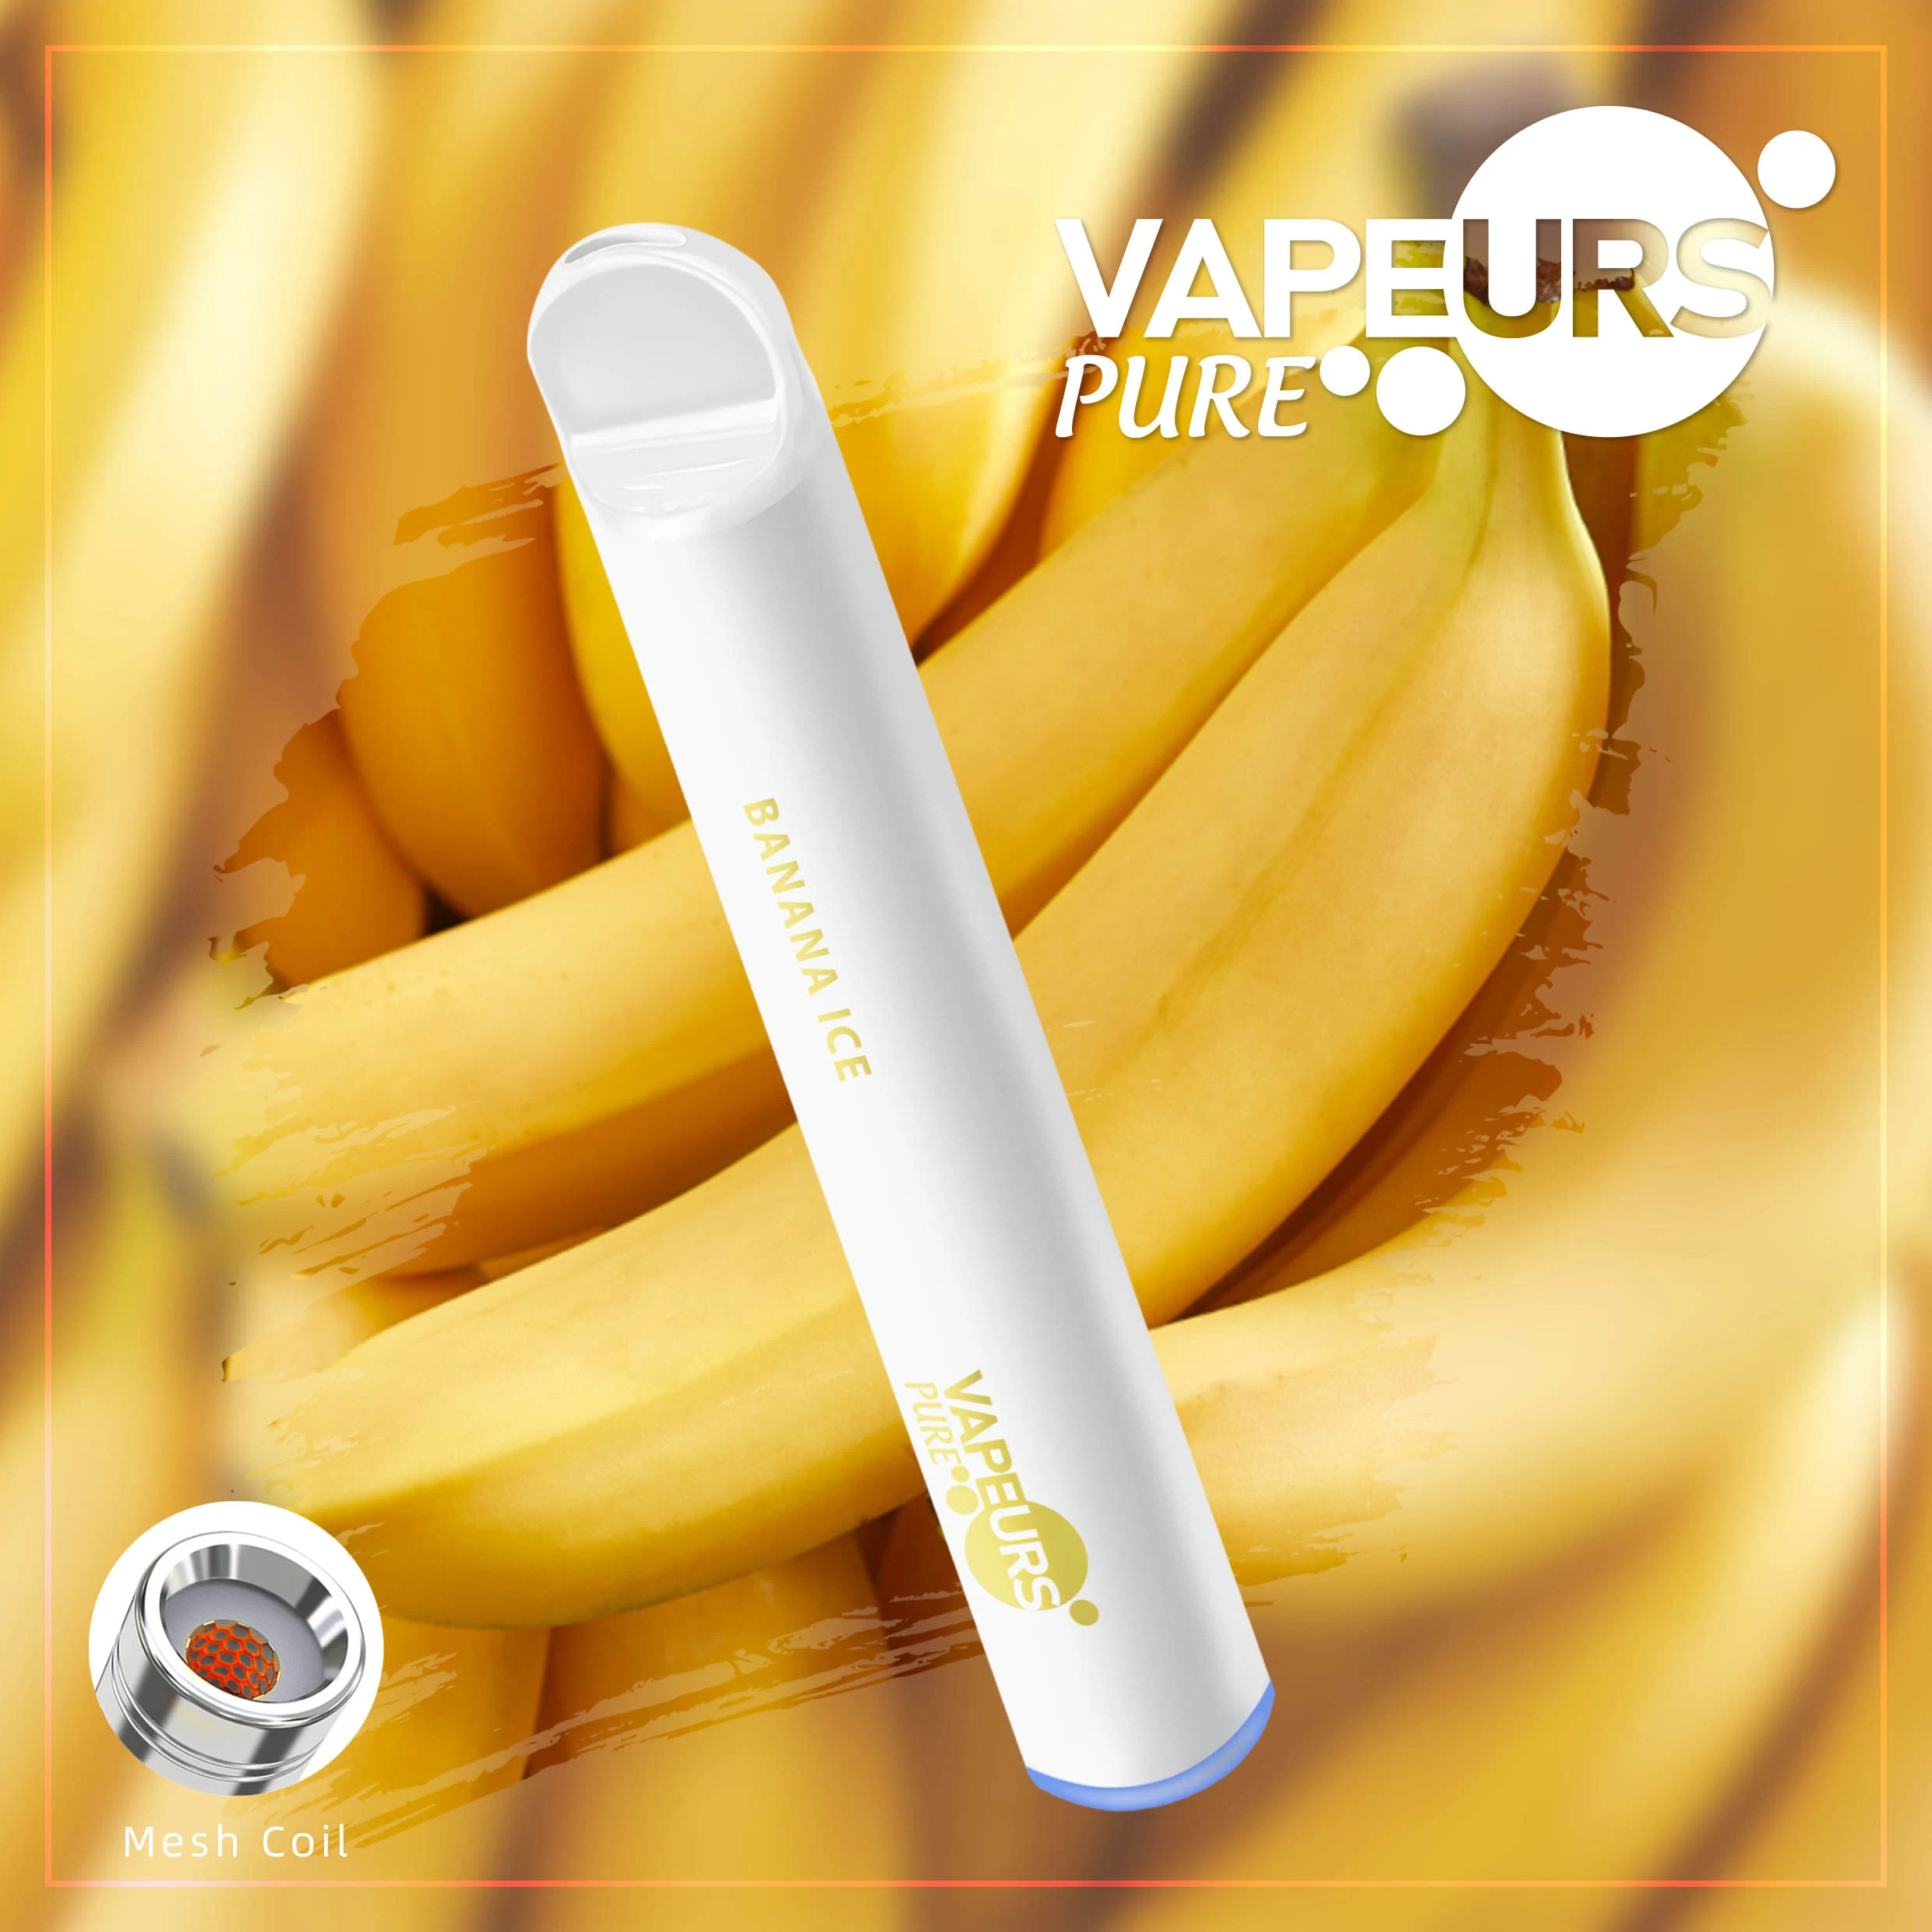 Vapeurs Pure White Electronic Cigarette Health Disposable/Chargeable 600 Puffs Vape Kits Price